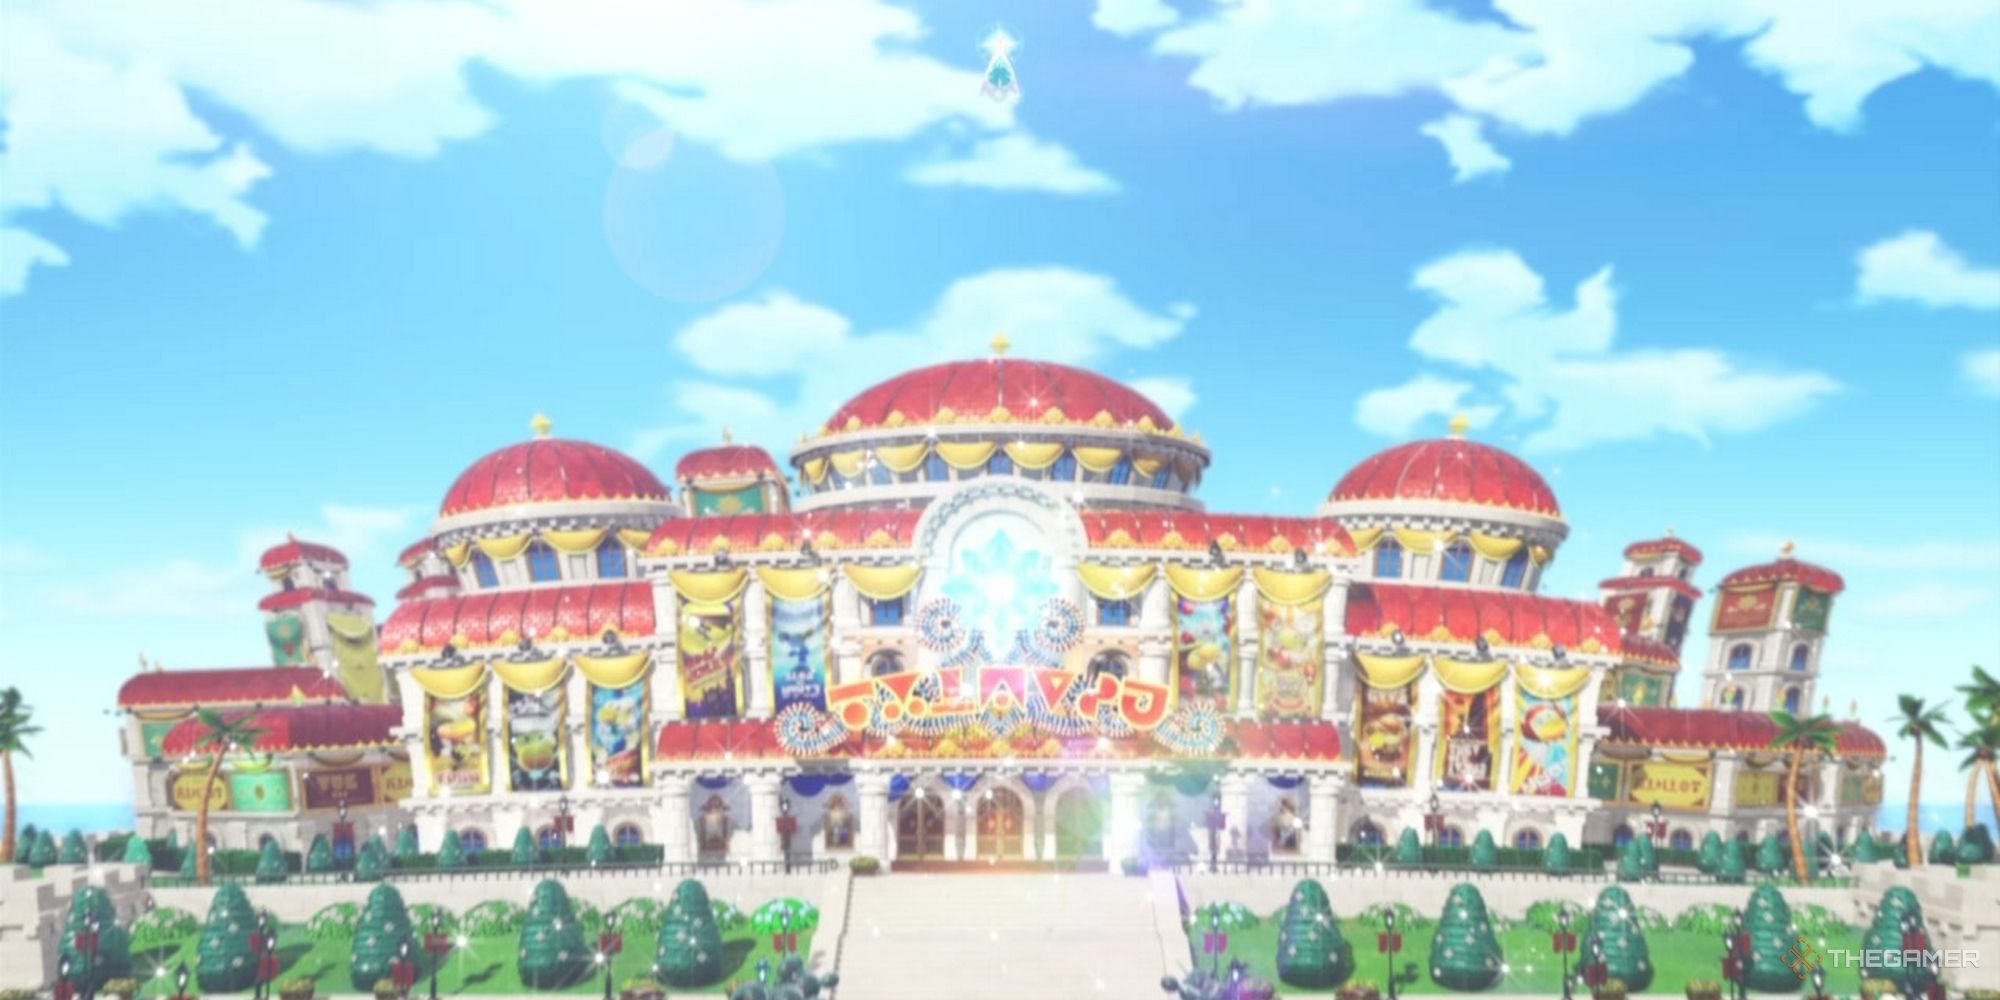 The Sparkle Theater in Princess Peach: Showtime!